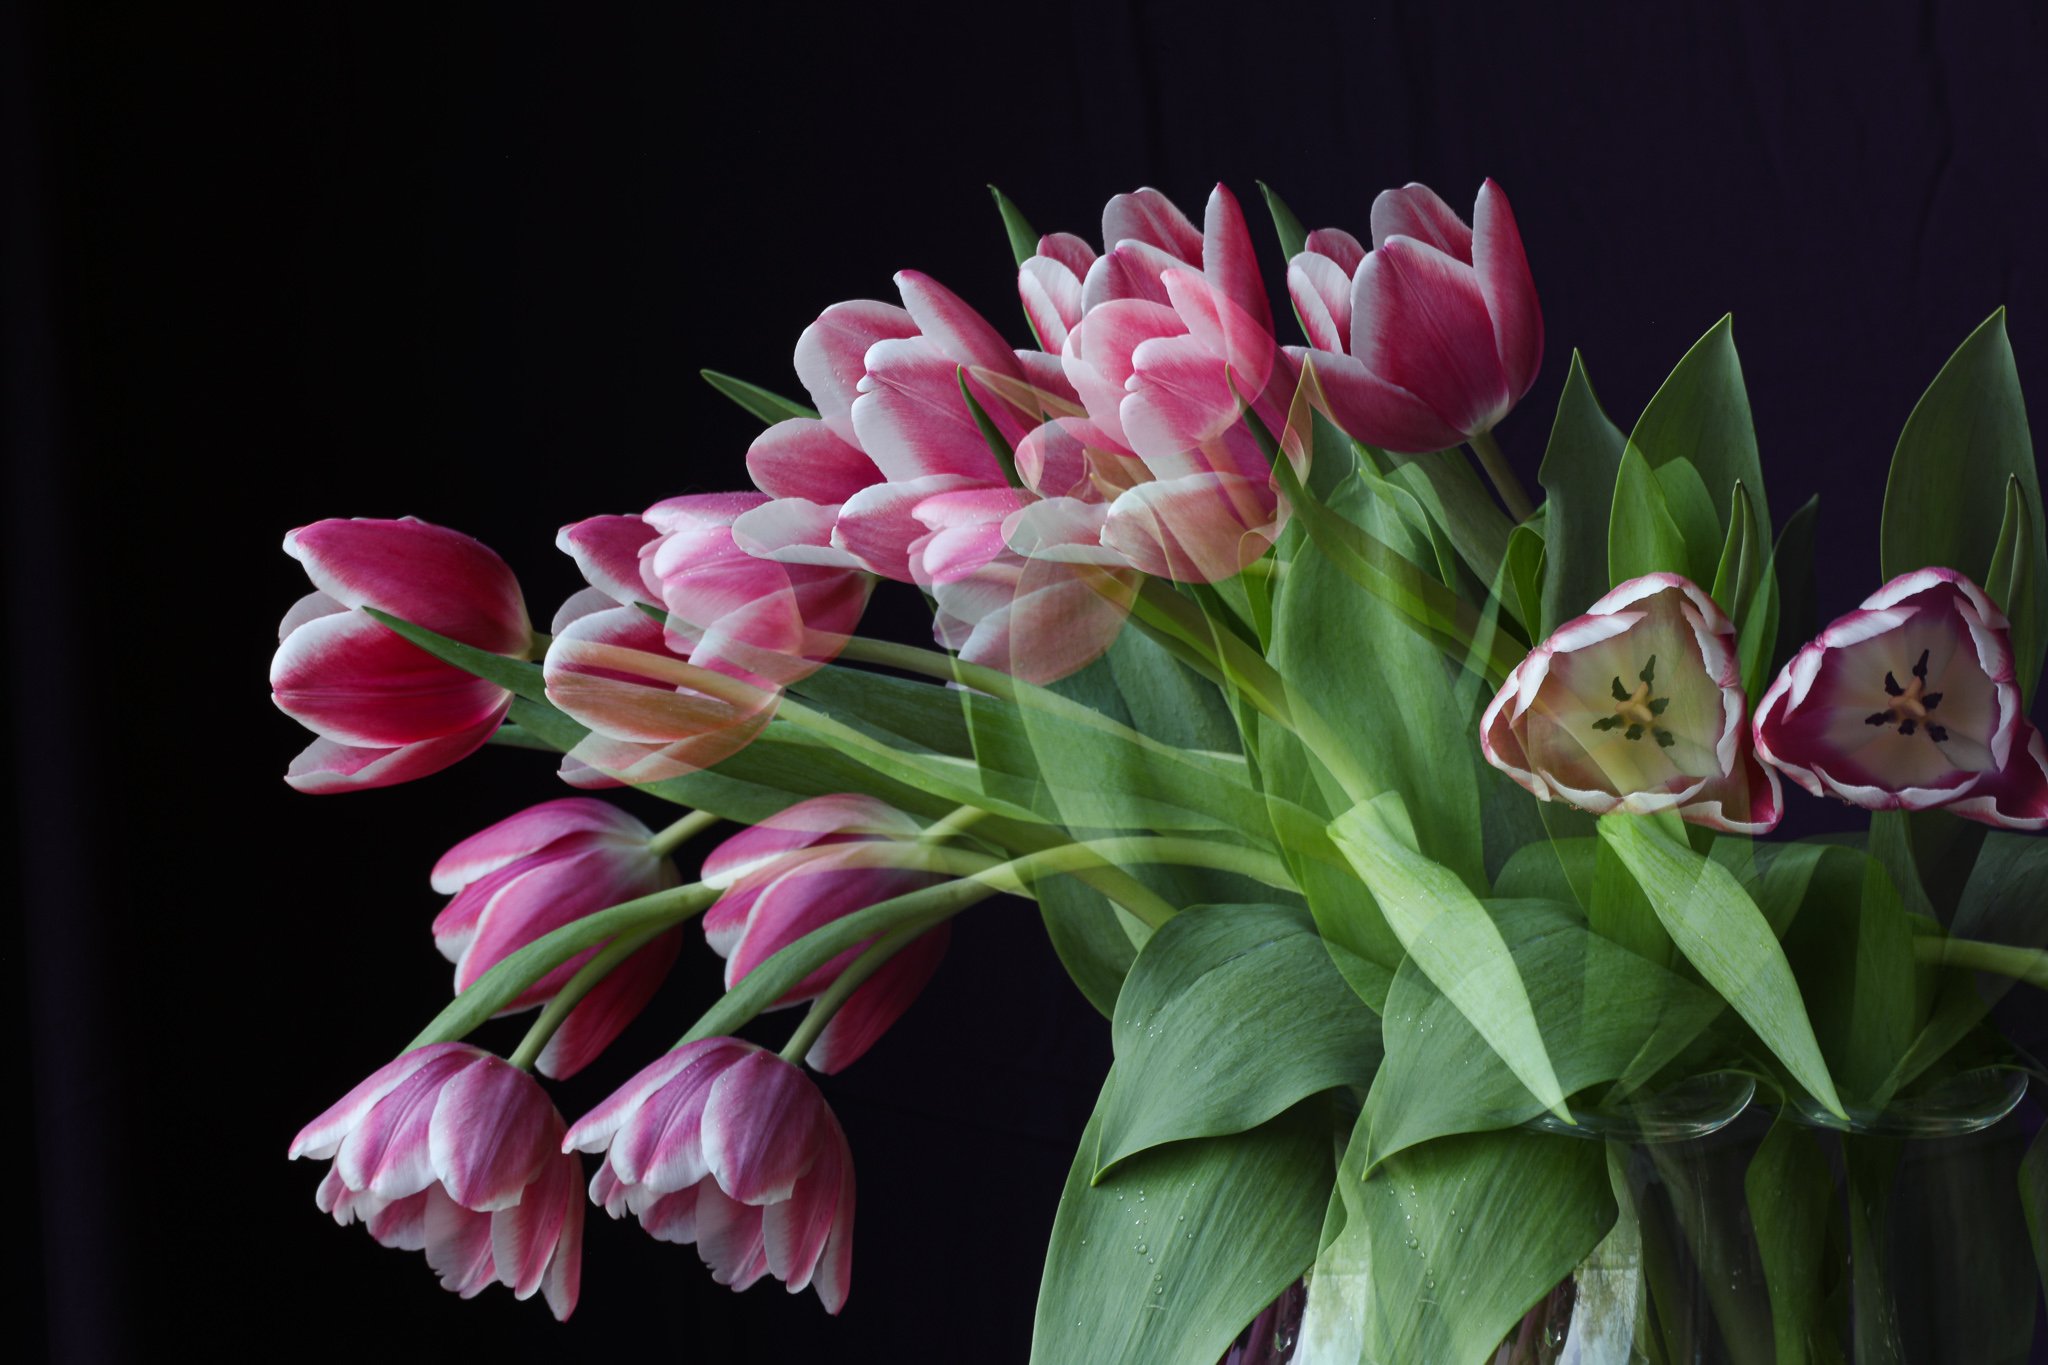 pink tulips in arch formation double exp.jpg